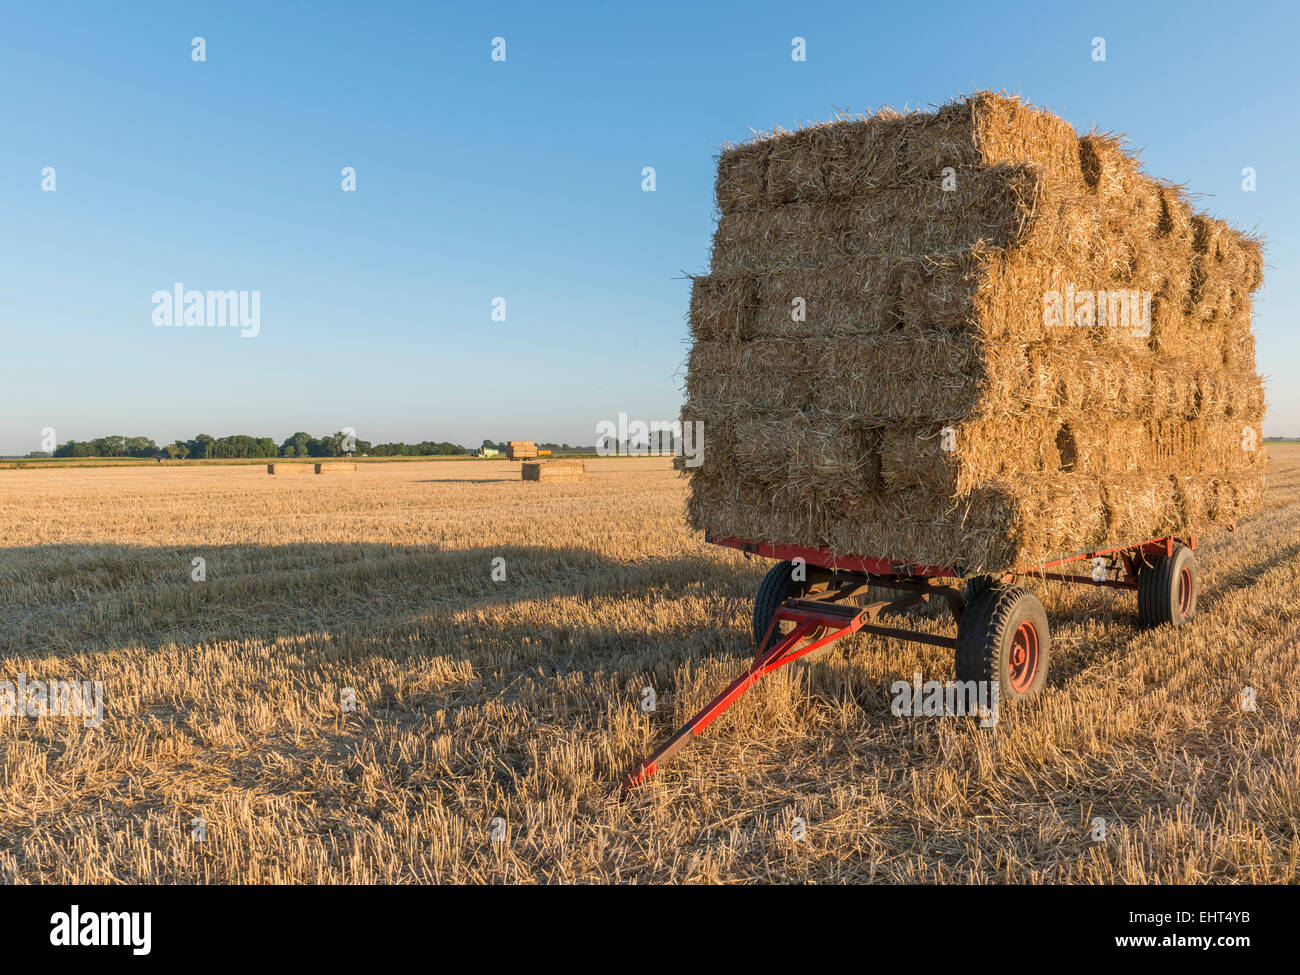 Big straw balls on a cart standing on a field. Stock Photo